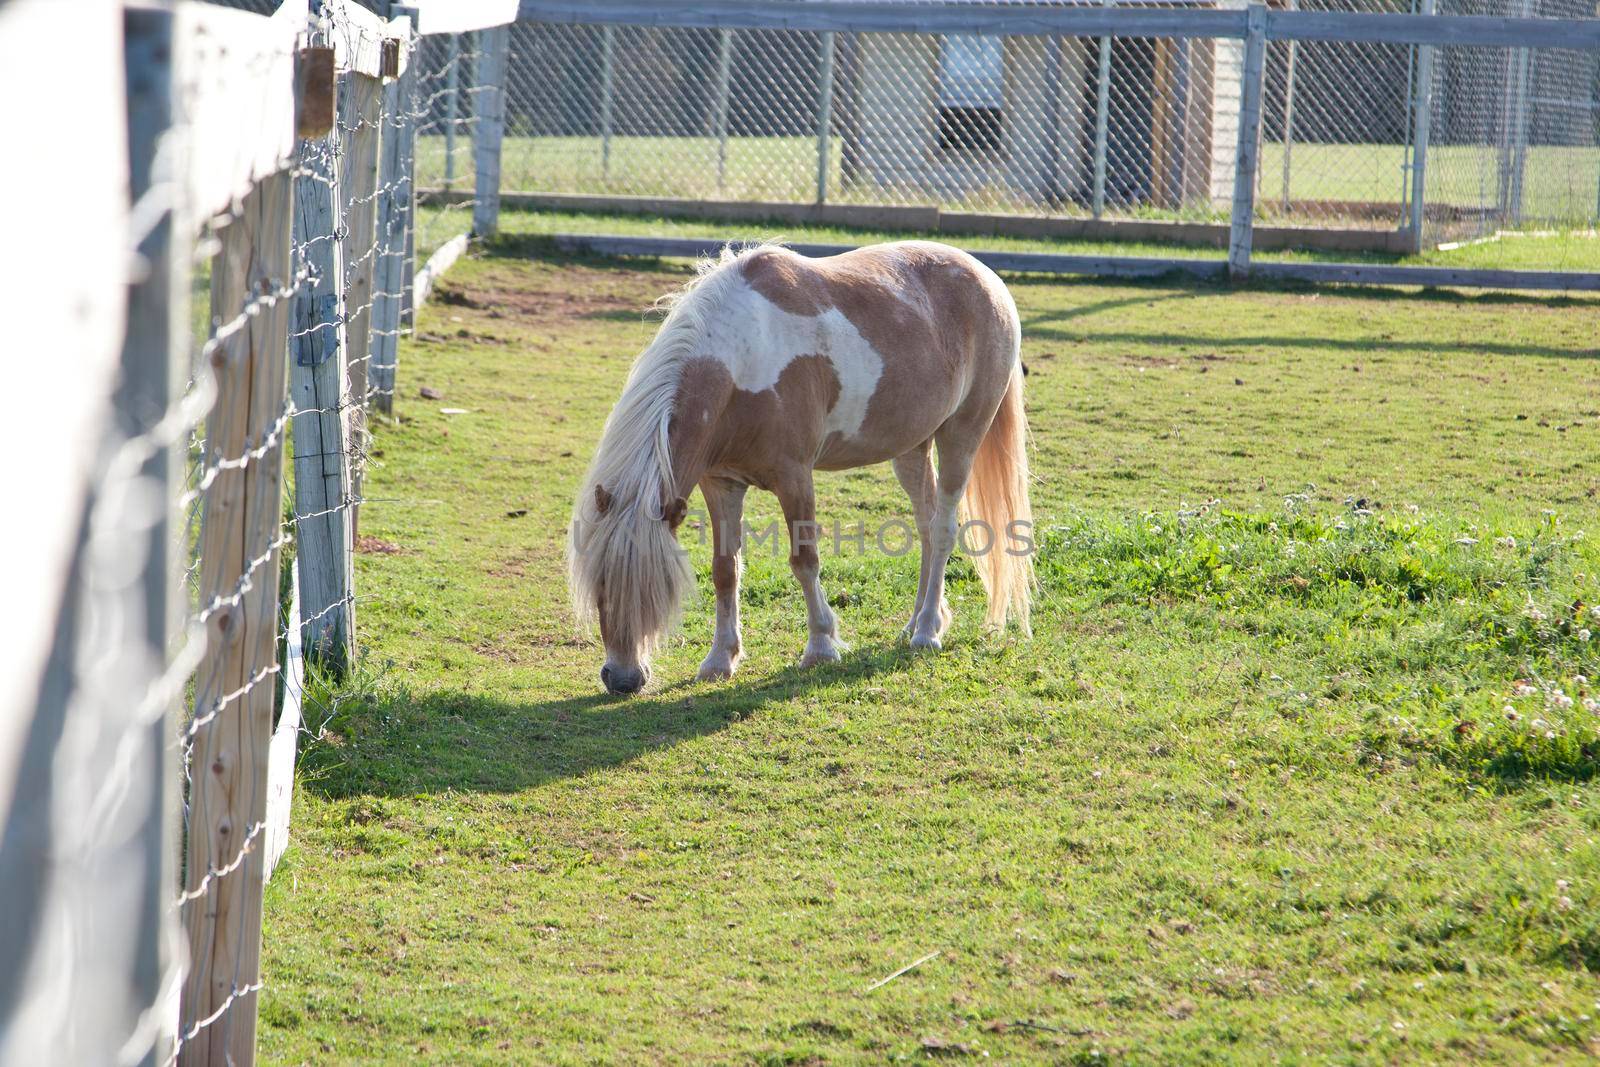 A small brown and white pony nibbles on some grass in the sunlight beside a wooden fence 